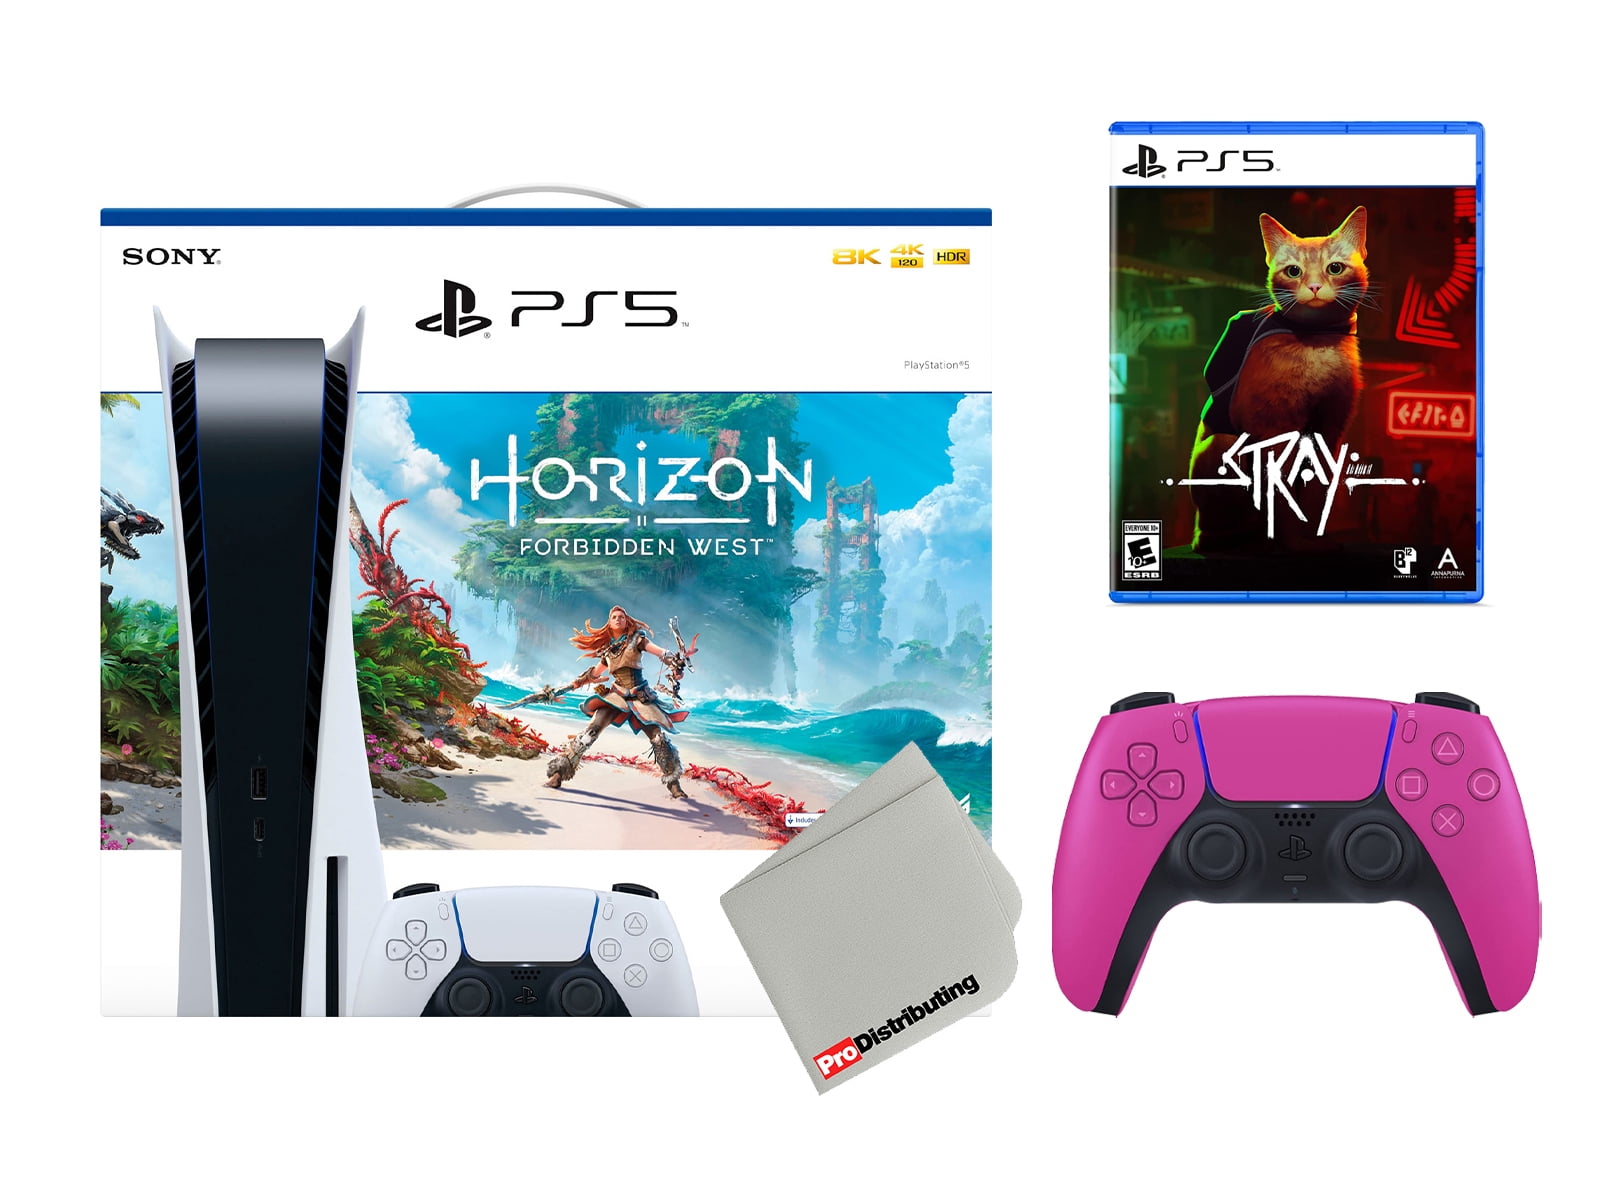 Stray - Sony PlayStation 5 for sale online